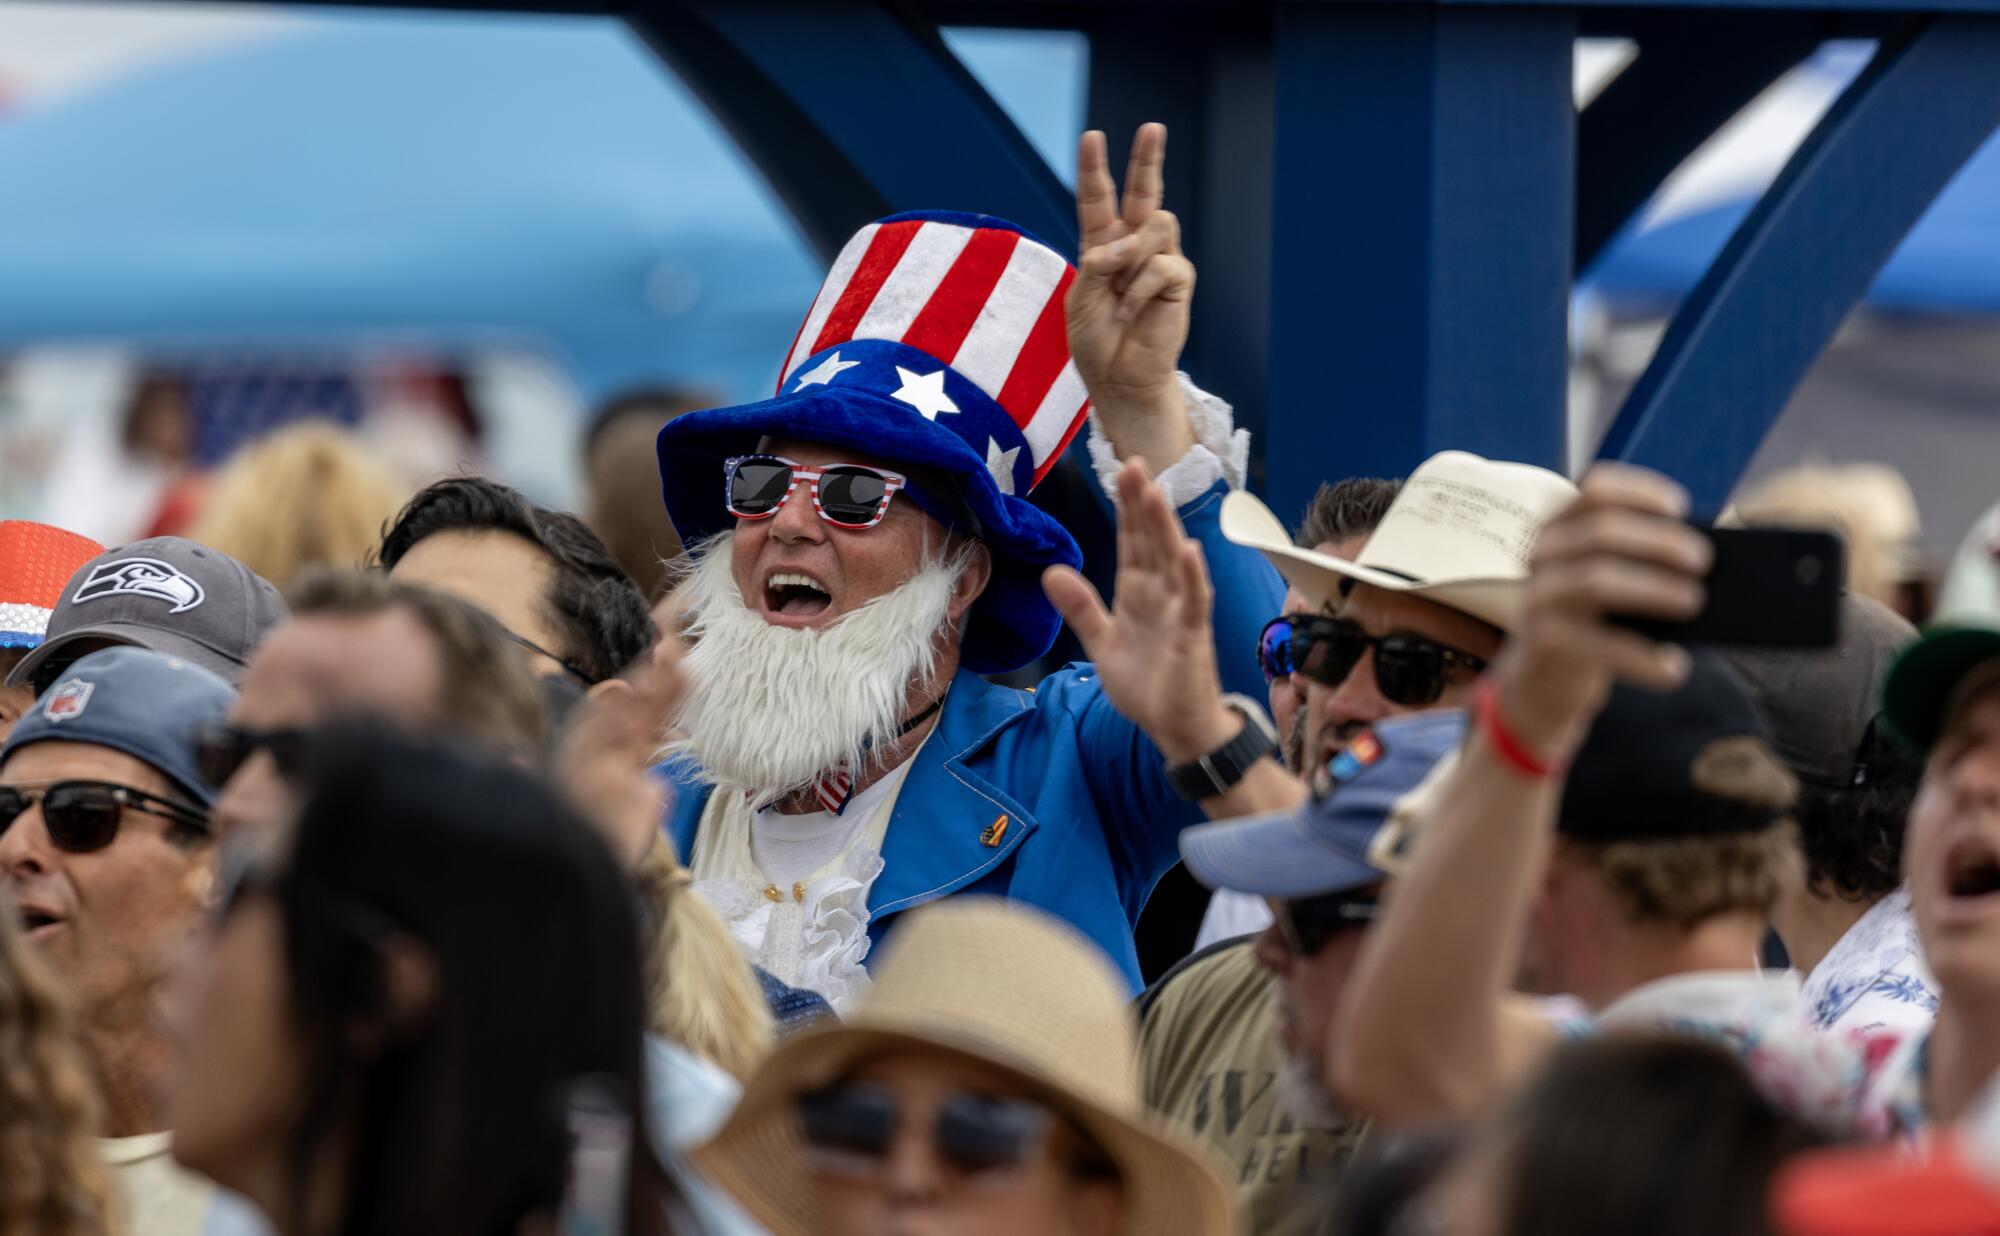 A man dressed as Uncle Sam in a crowd of people